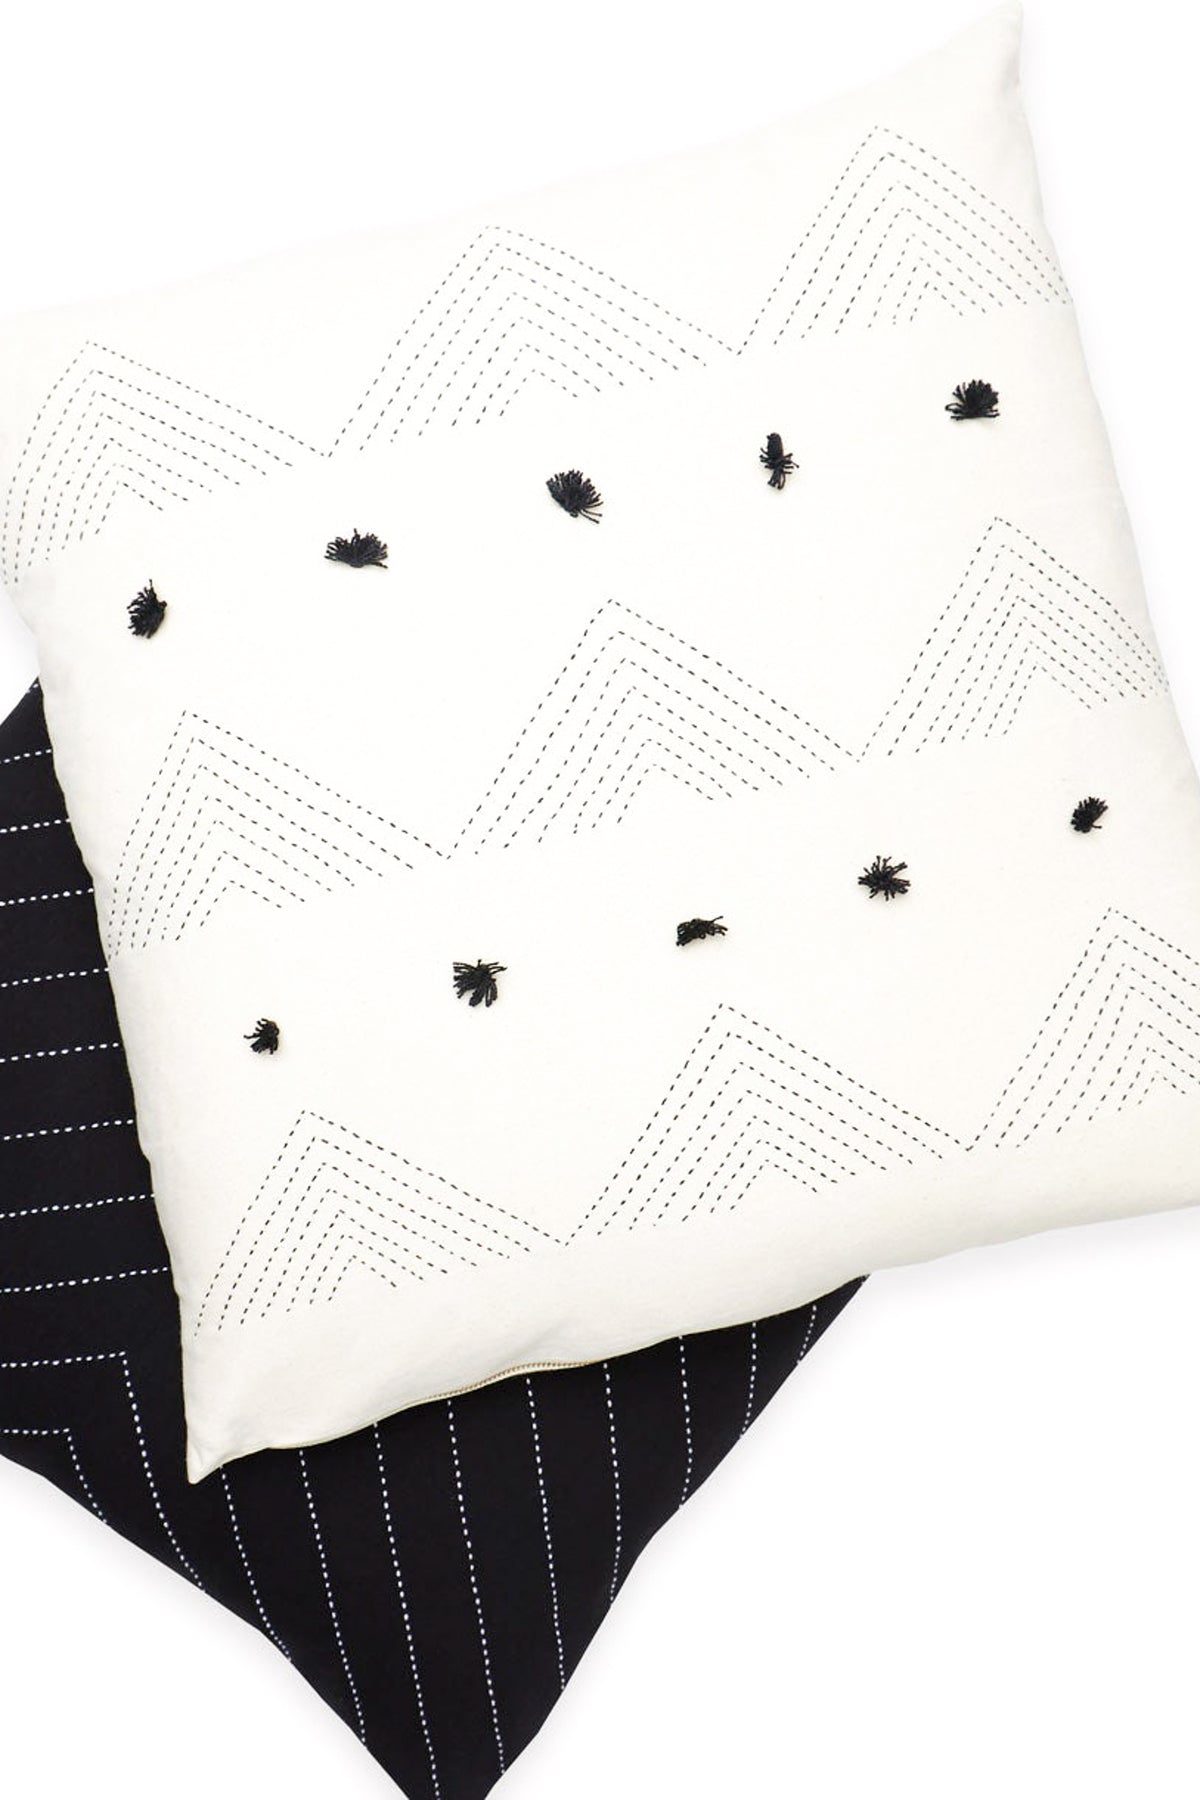 Anchal Project Triangle Stitch Throw Pillow Cover - Bone